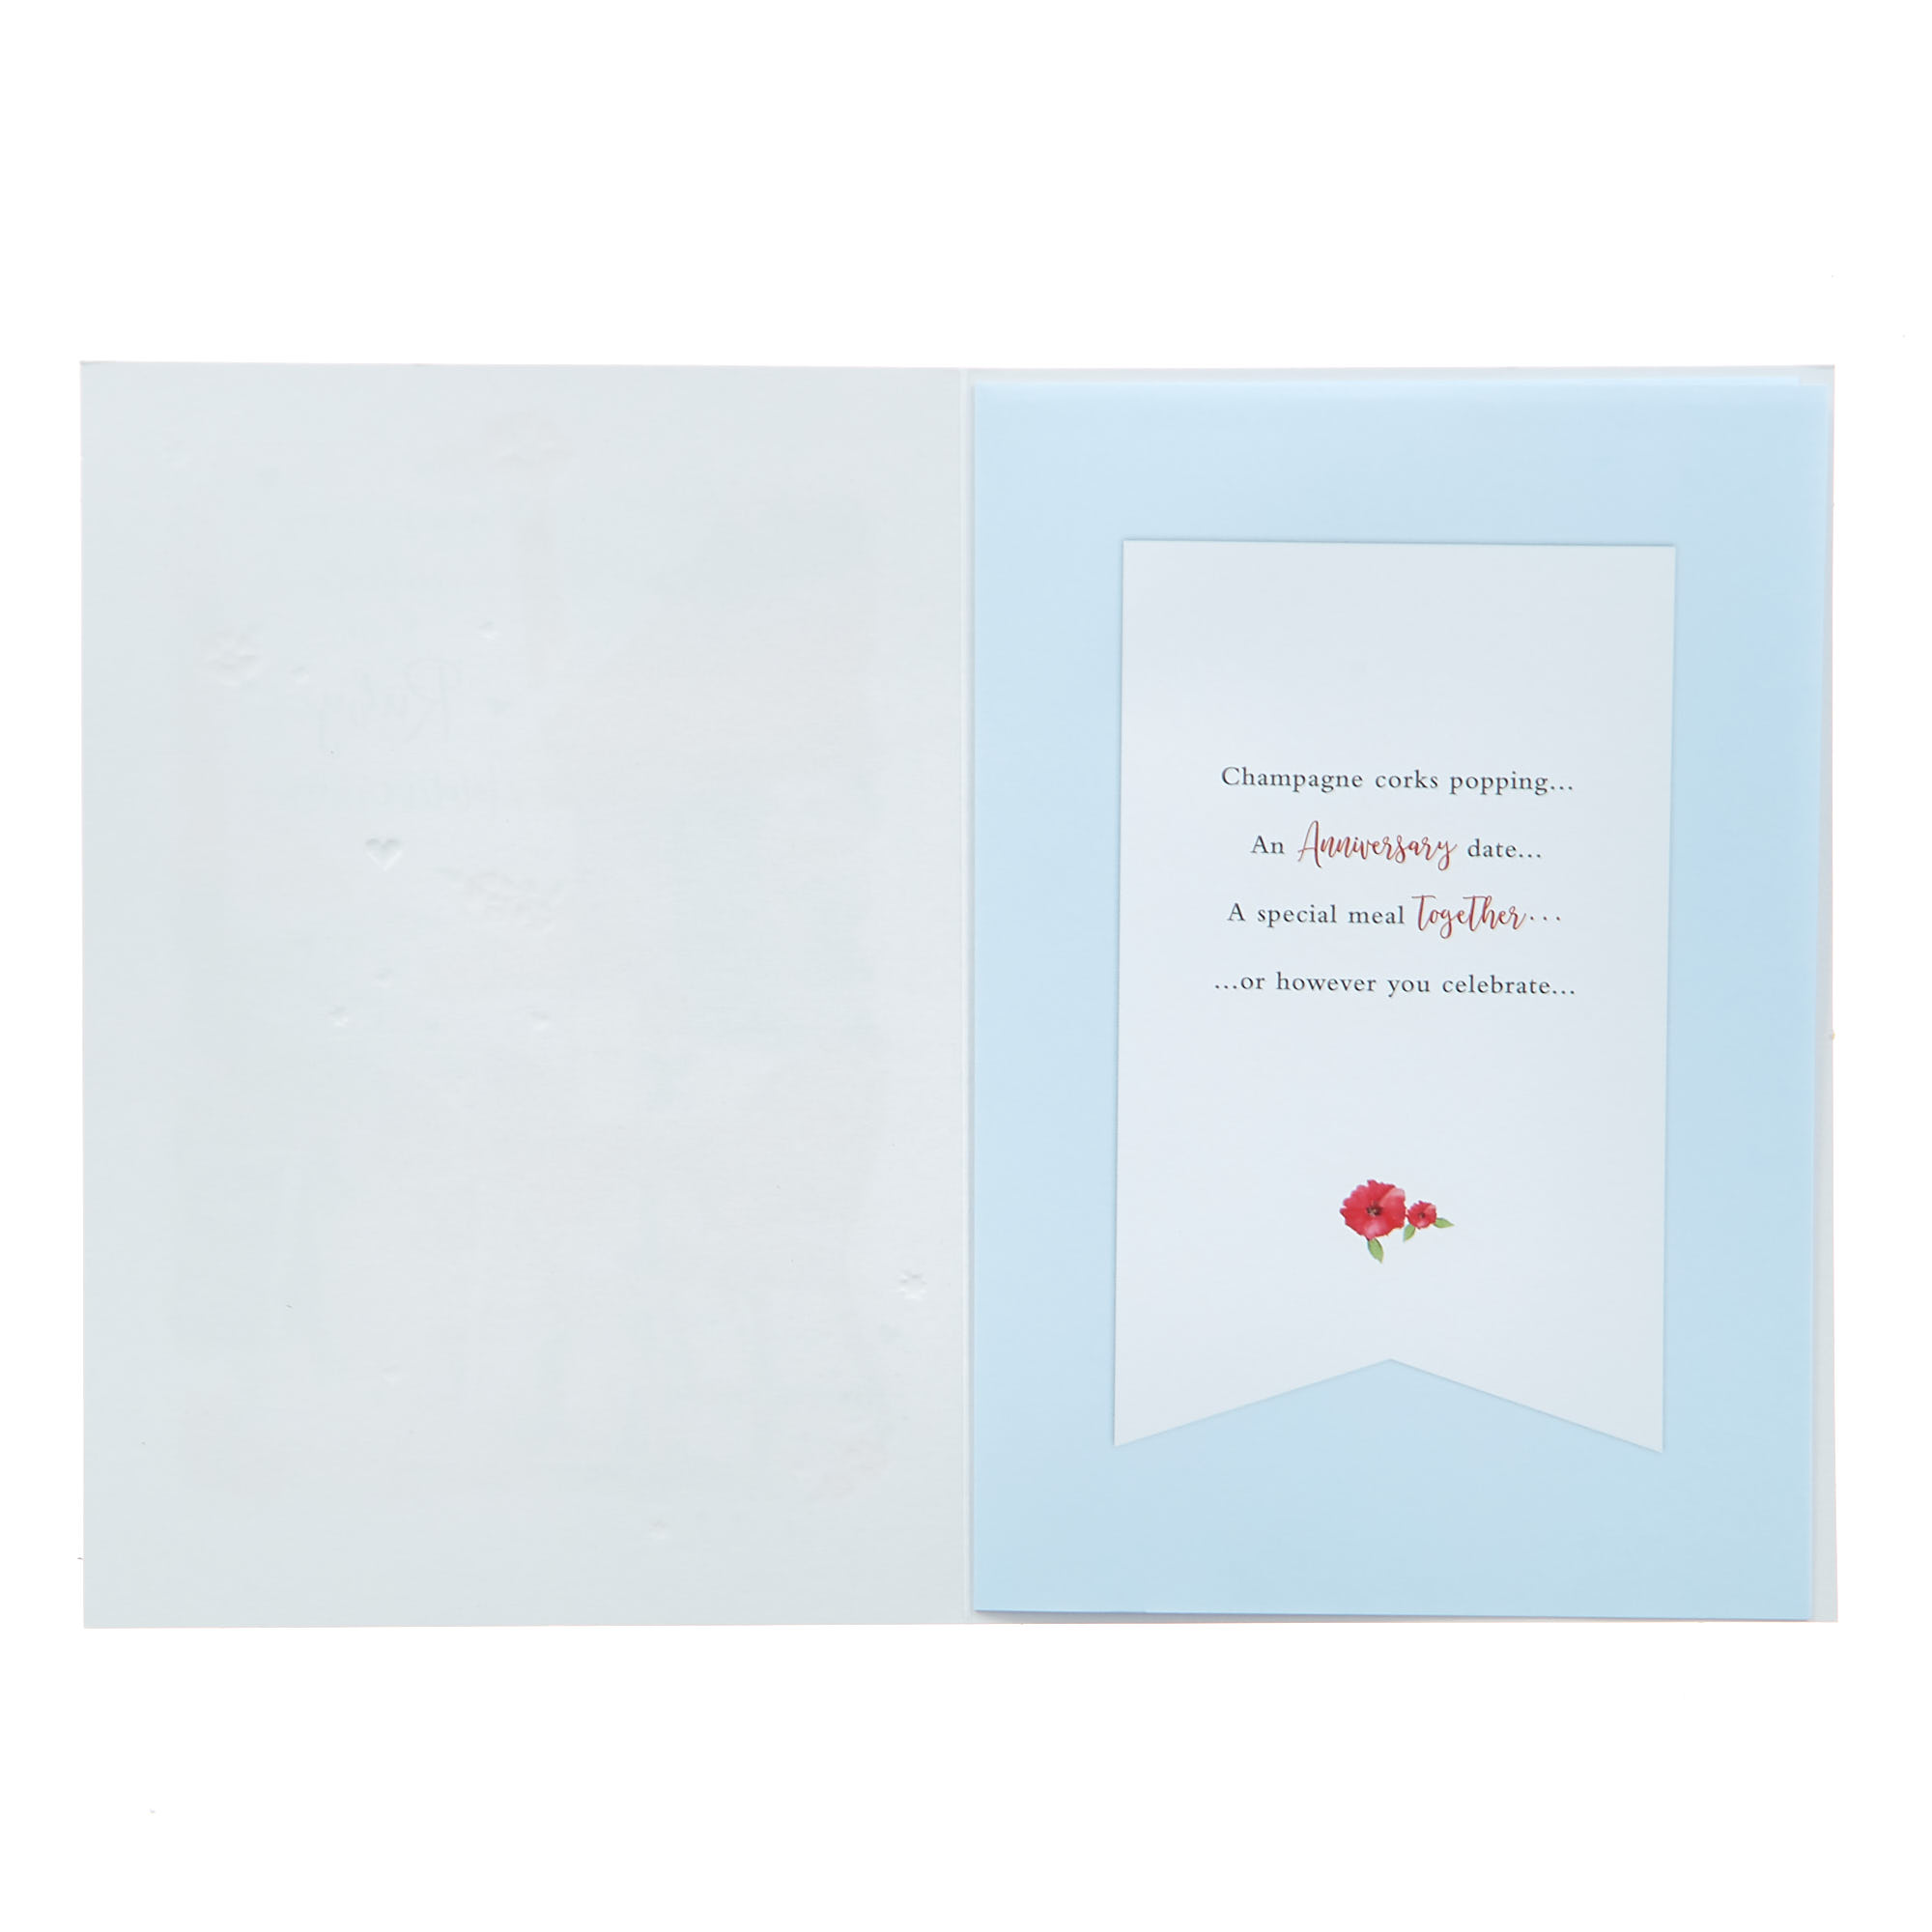 40th Wedding Anniversary Card - Your Ruby Anniversary